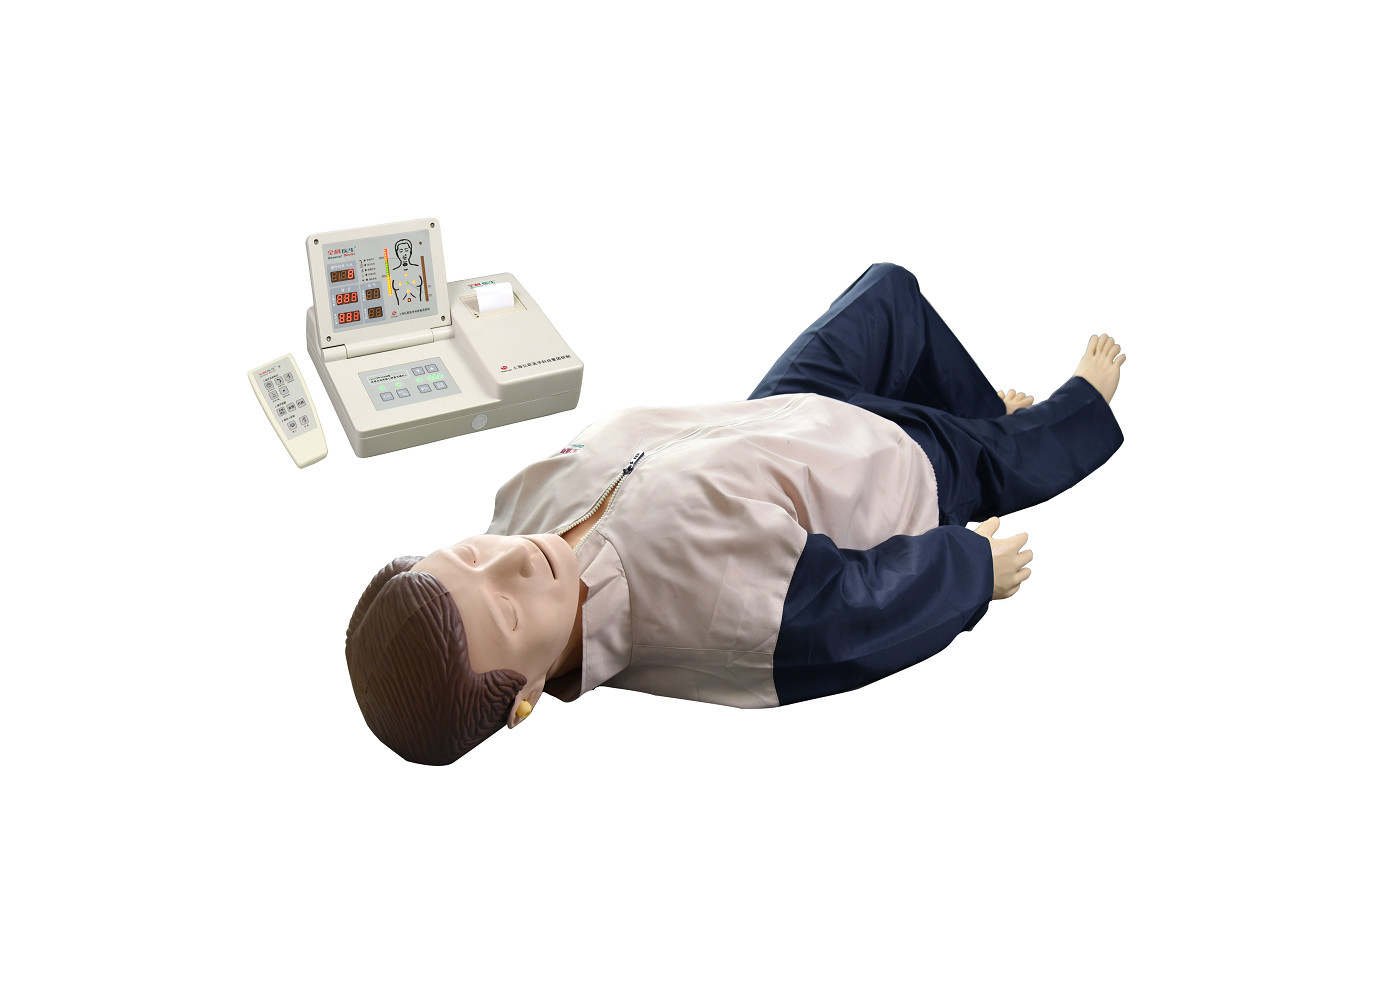 Cardiopulmonary Resuscitation First Aid Manikins with Monitor Control for Practising